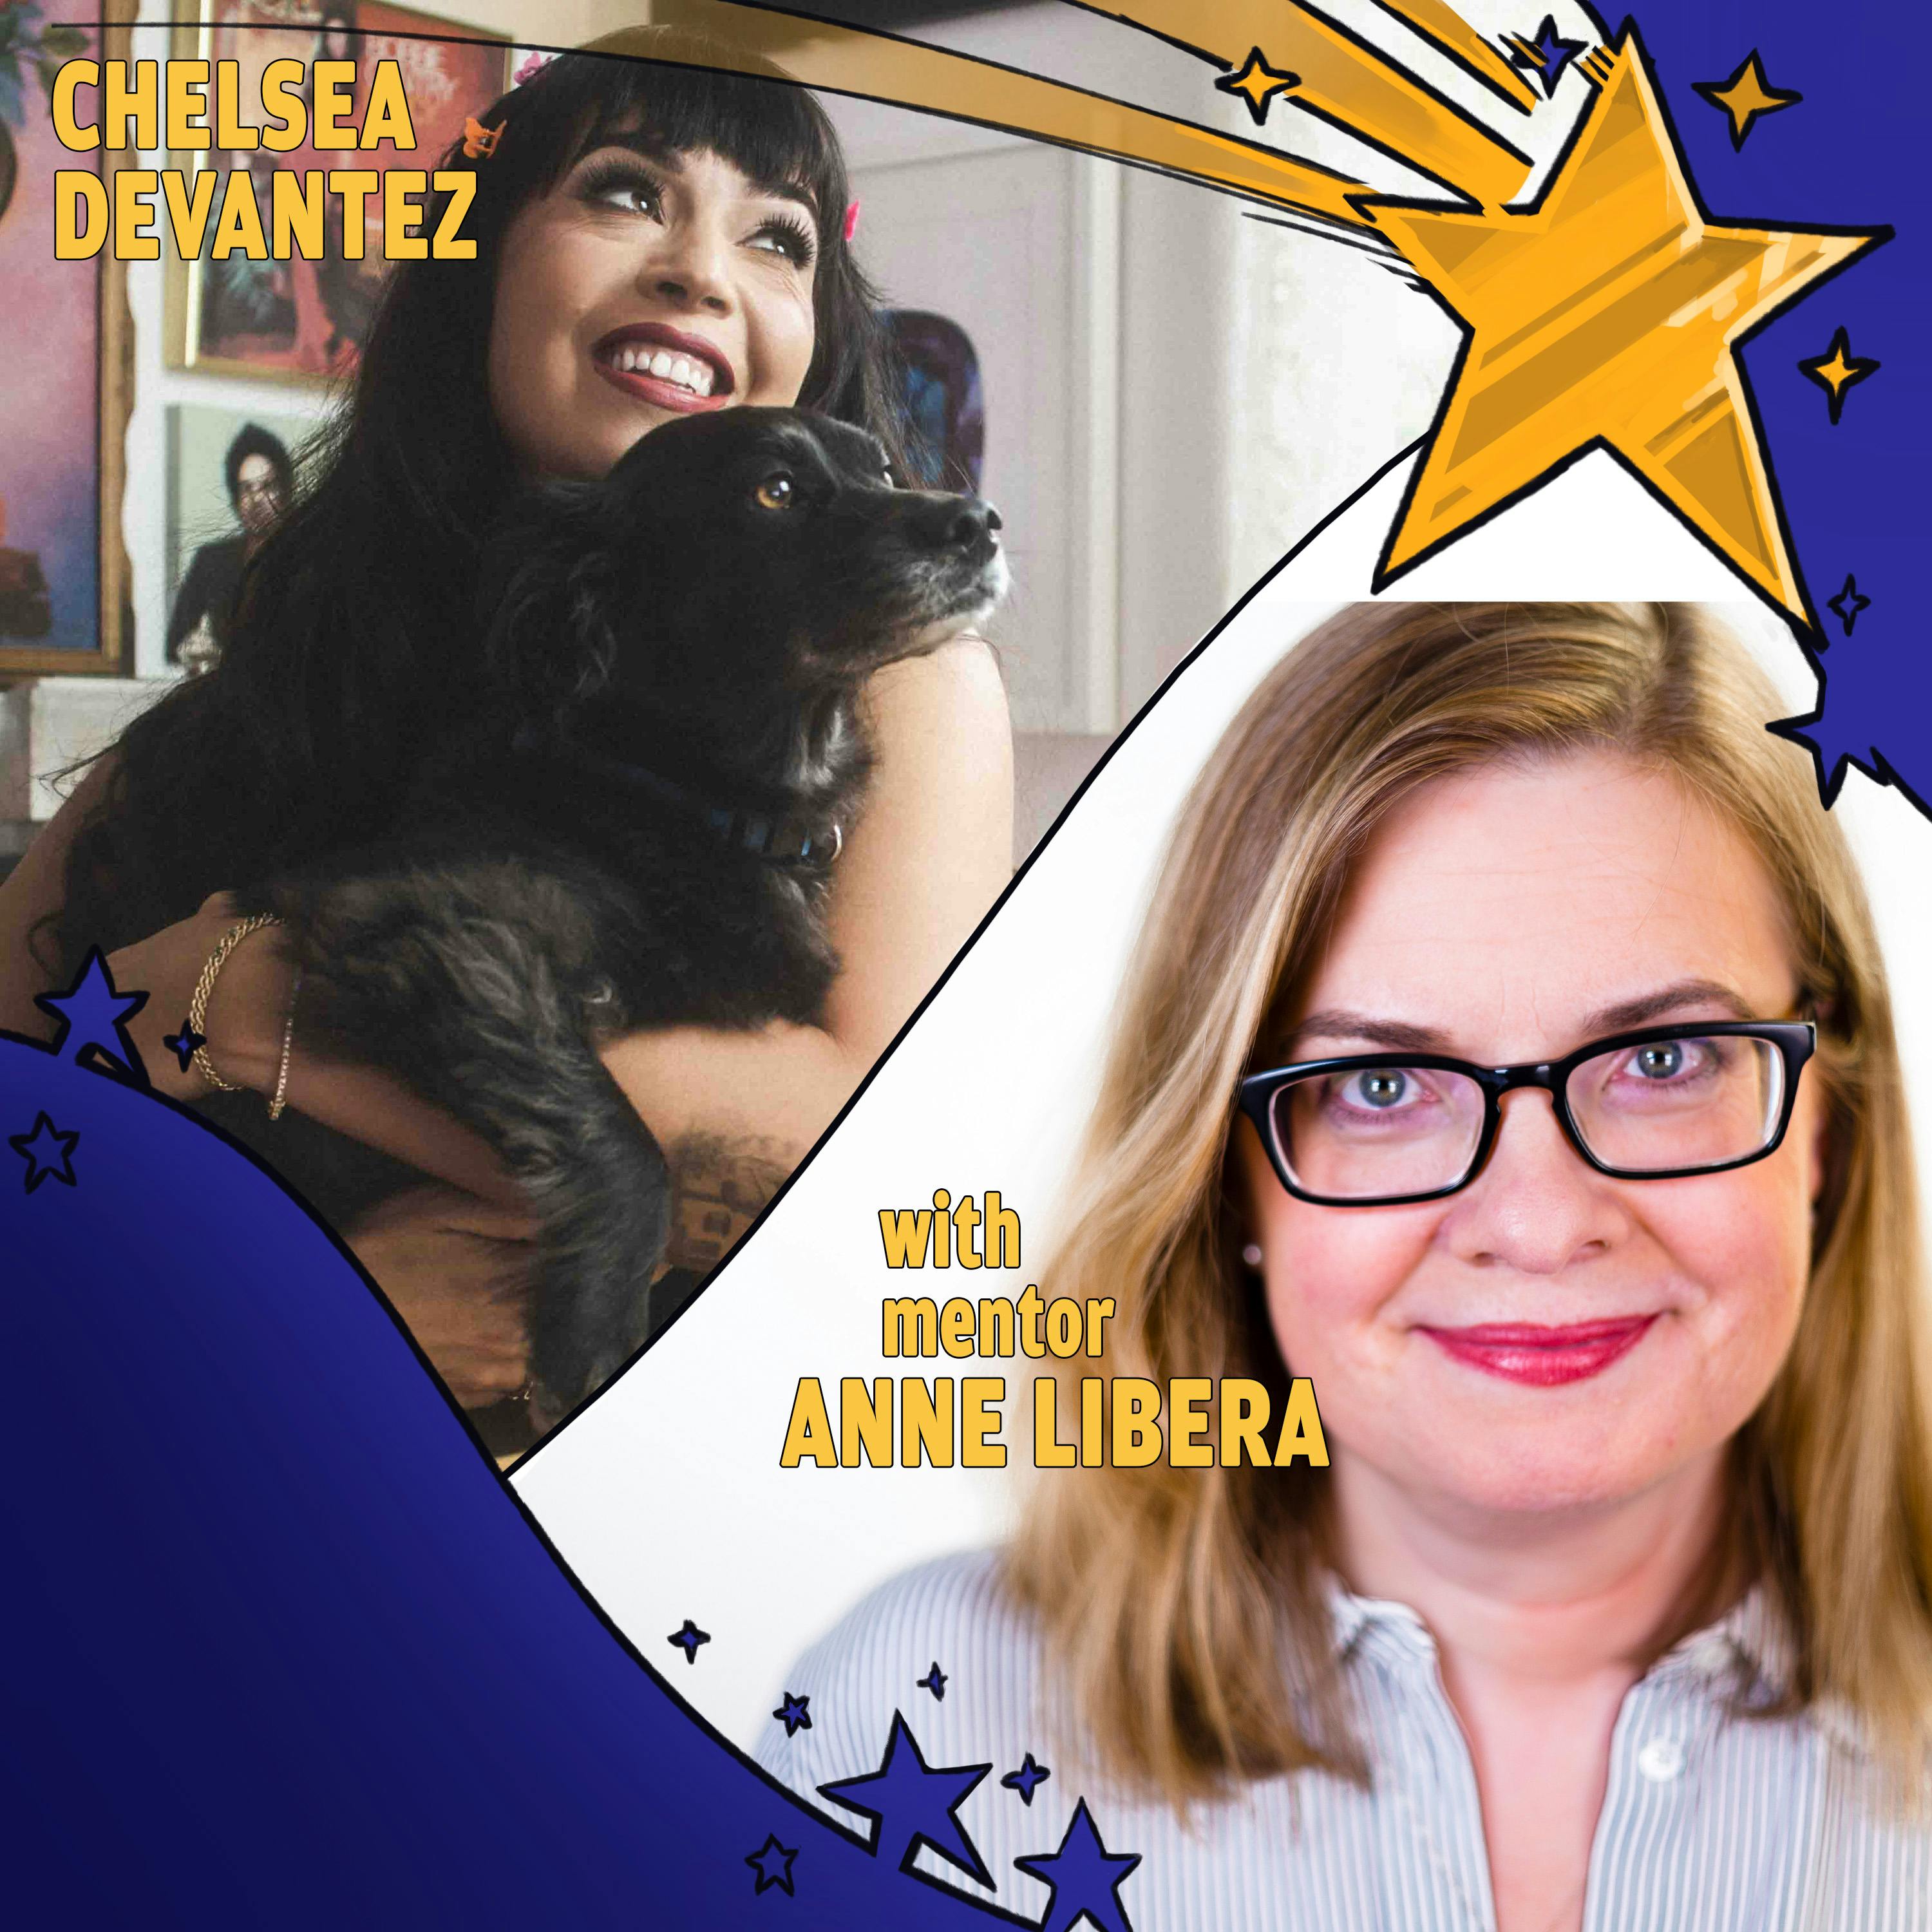 Comedy writing with Chelsea Devantez and Anne Libera